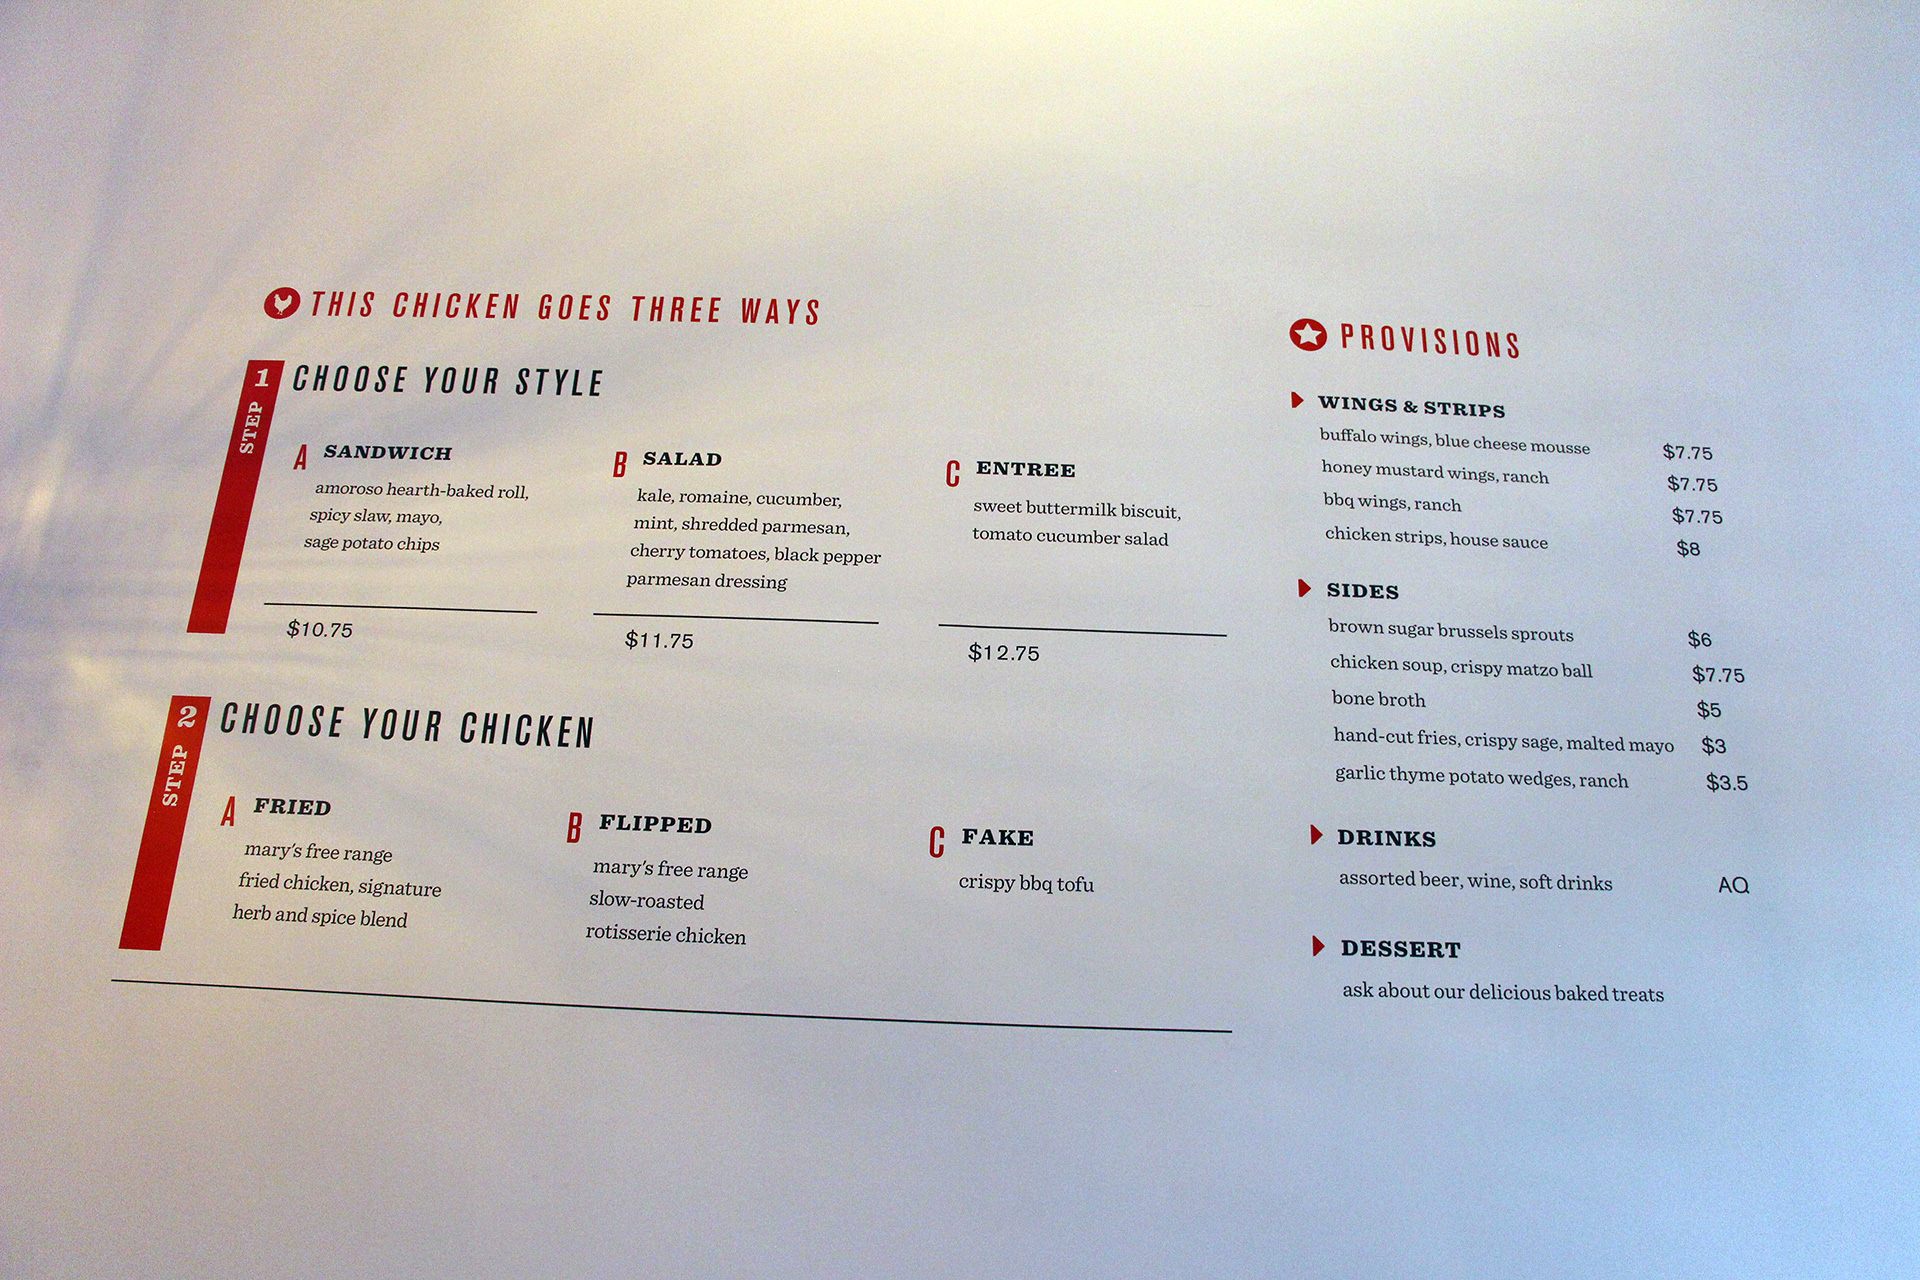 The menu at Proposition Chicken